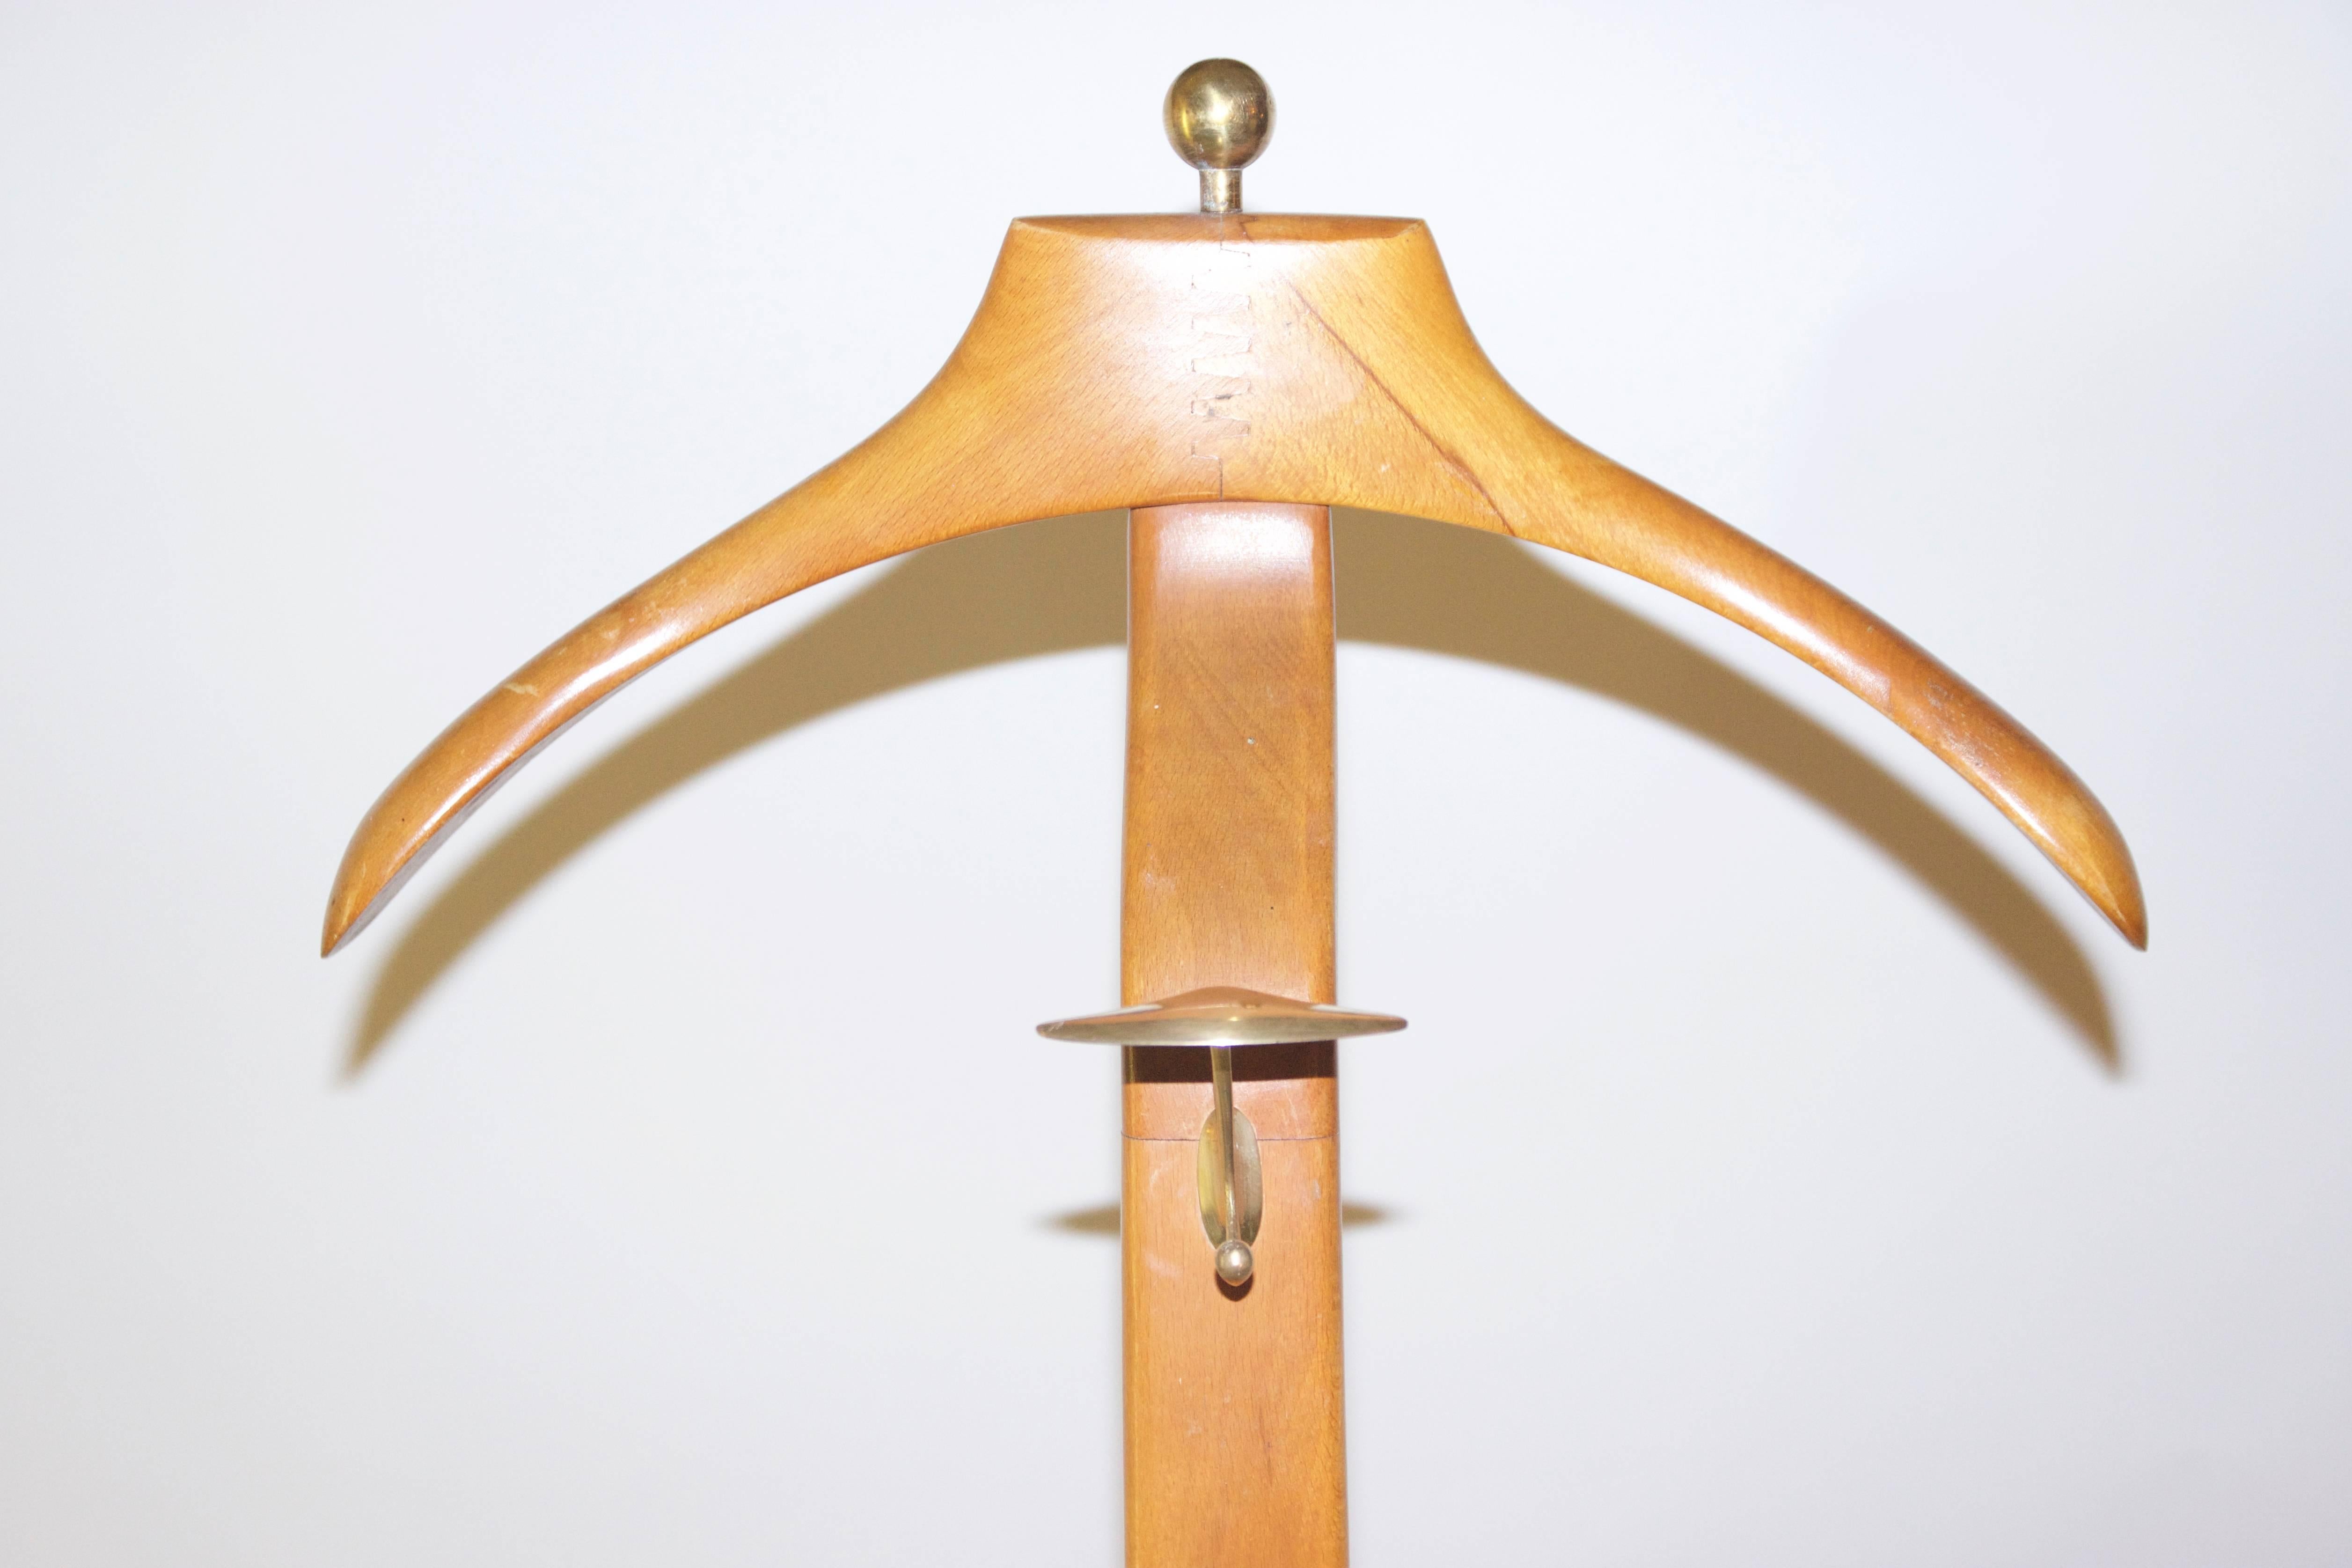 Style Ico Parisi, easel,
wood and golden brass,
circa 1970, Italy.
Measures: Height 1m45, width 45 cm, depth 40 cm.